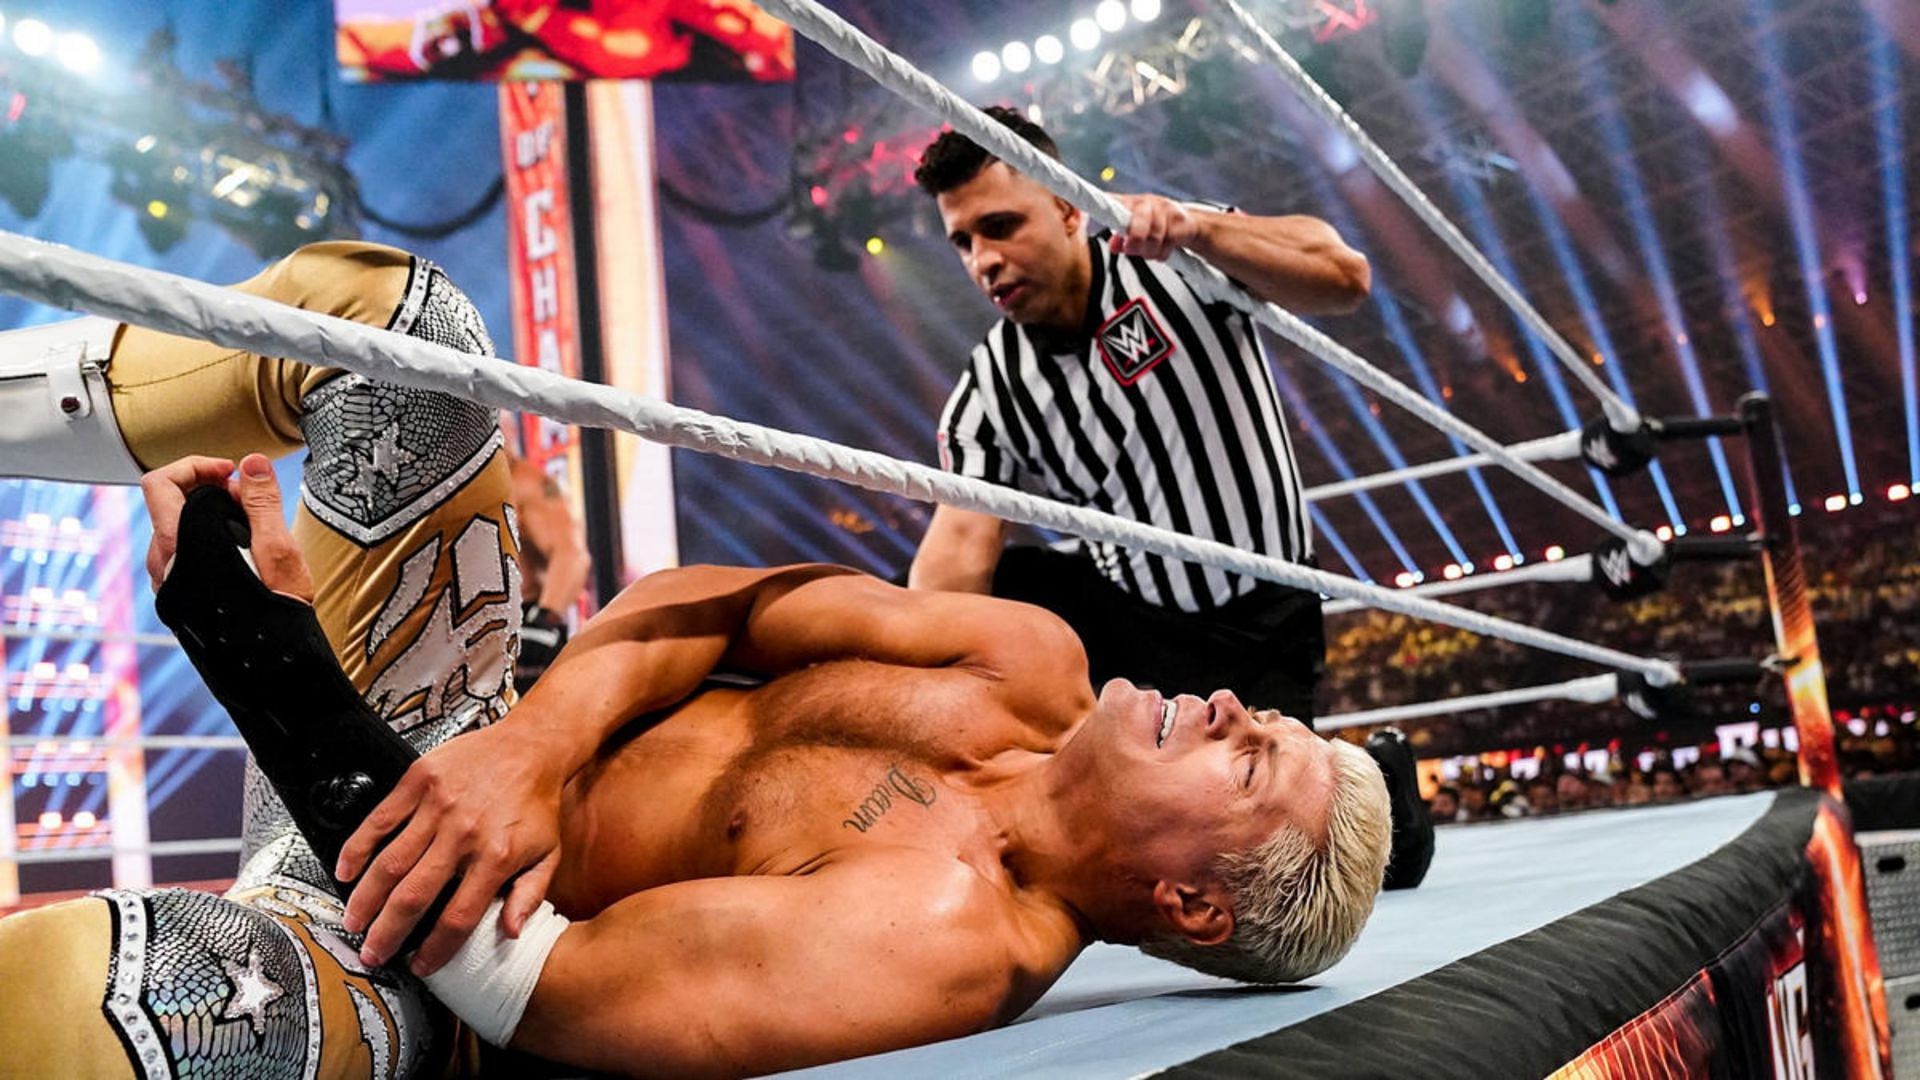 Cody Rhodes lost to Brock Lesnar at WWE Night of Champions